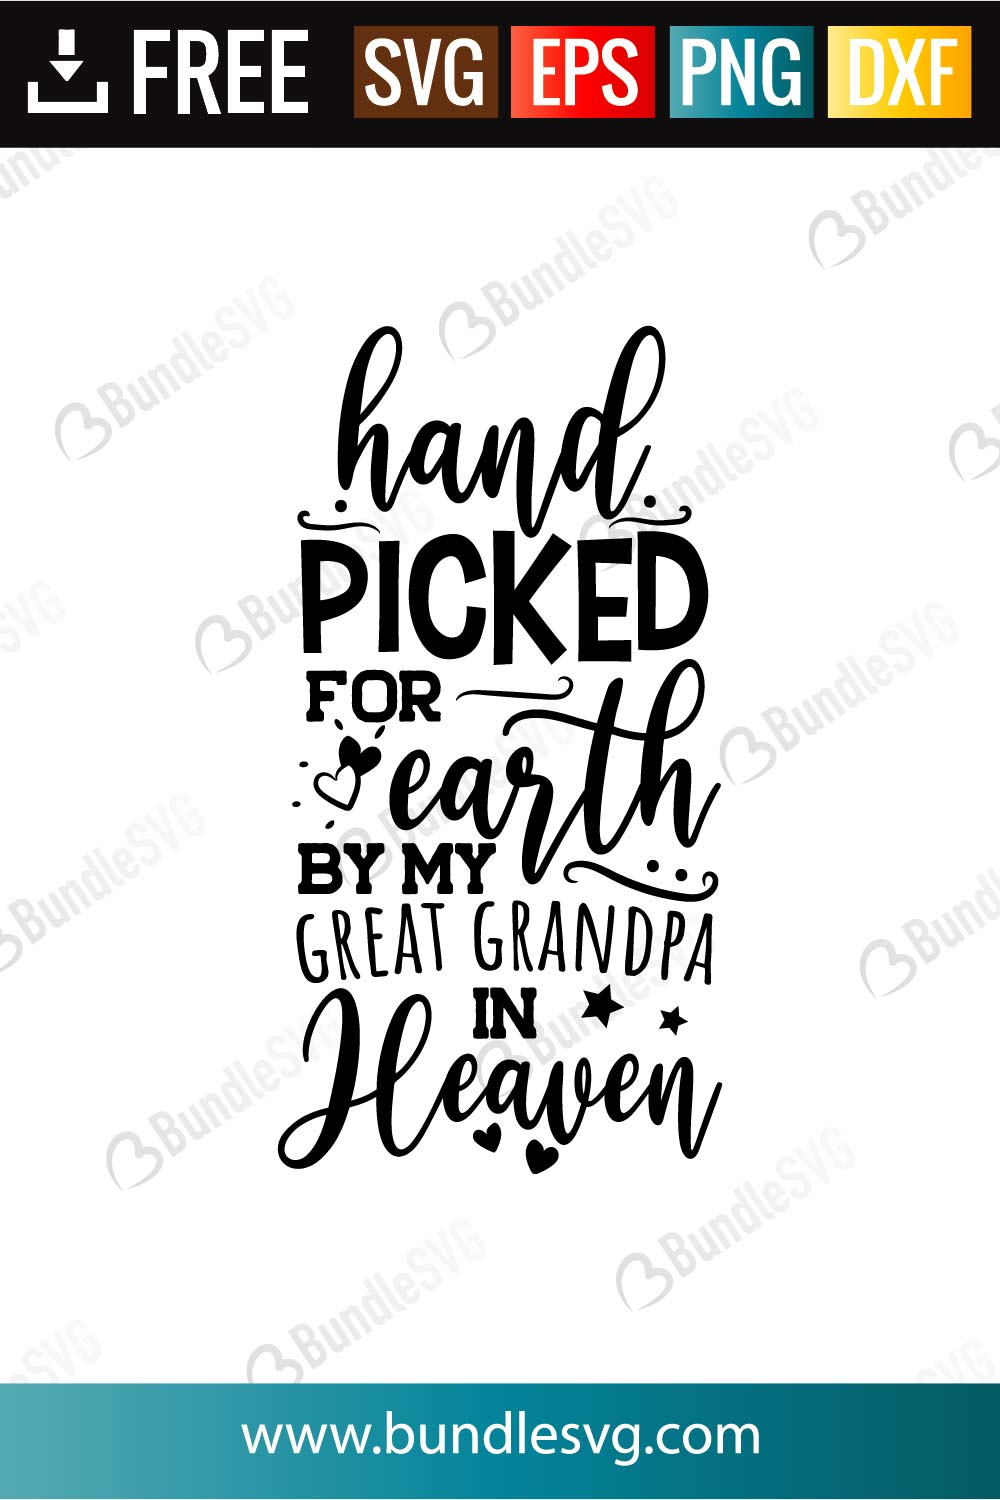 Download Hand Picked For Earth By My Grandpa In Heaven Svg Cut Files Bundlesvg